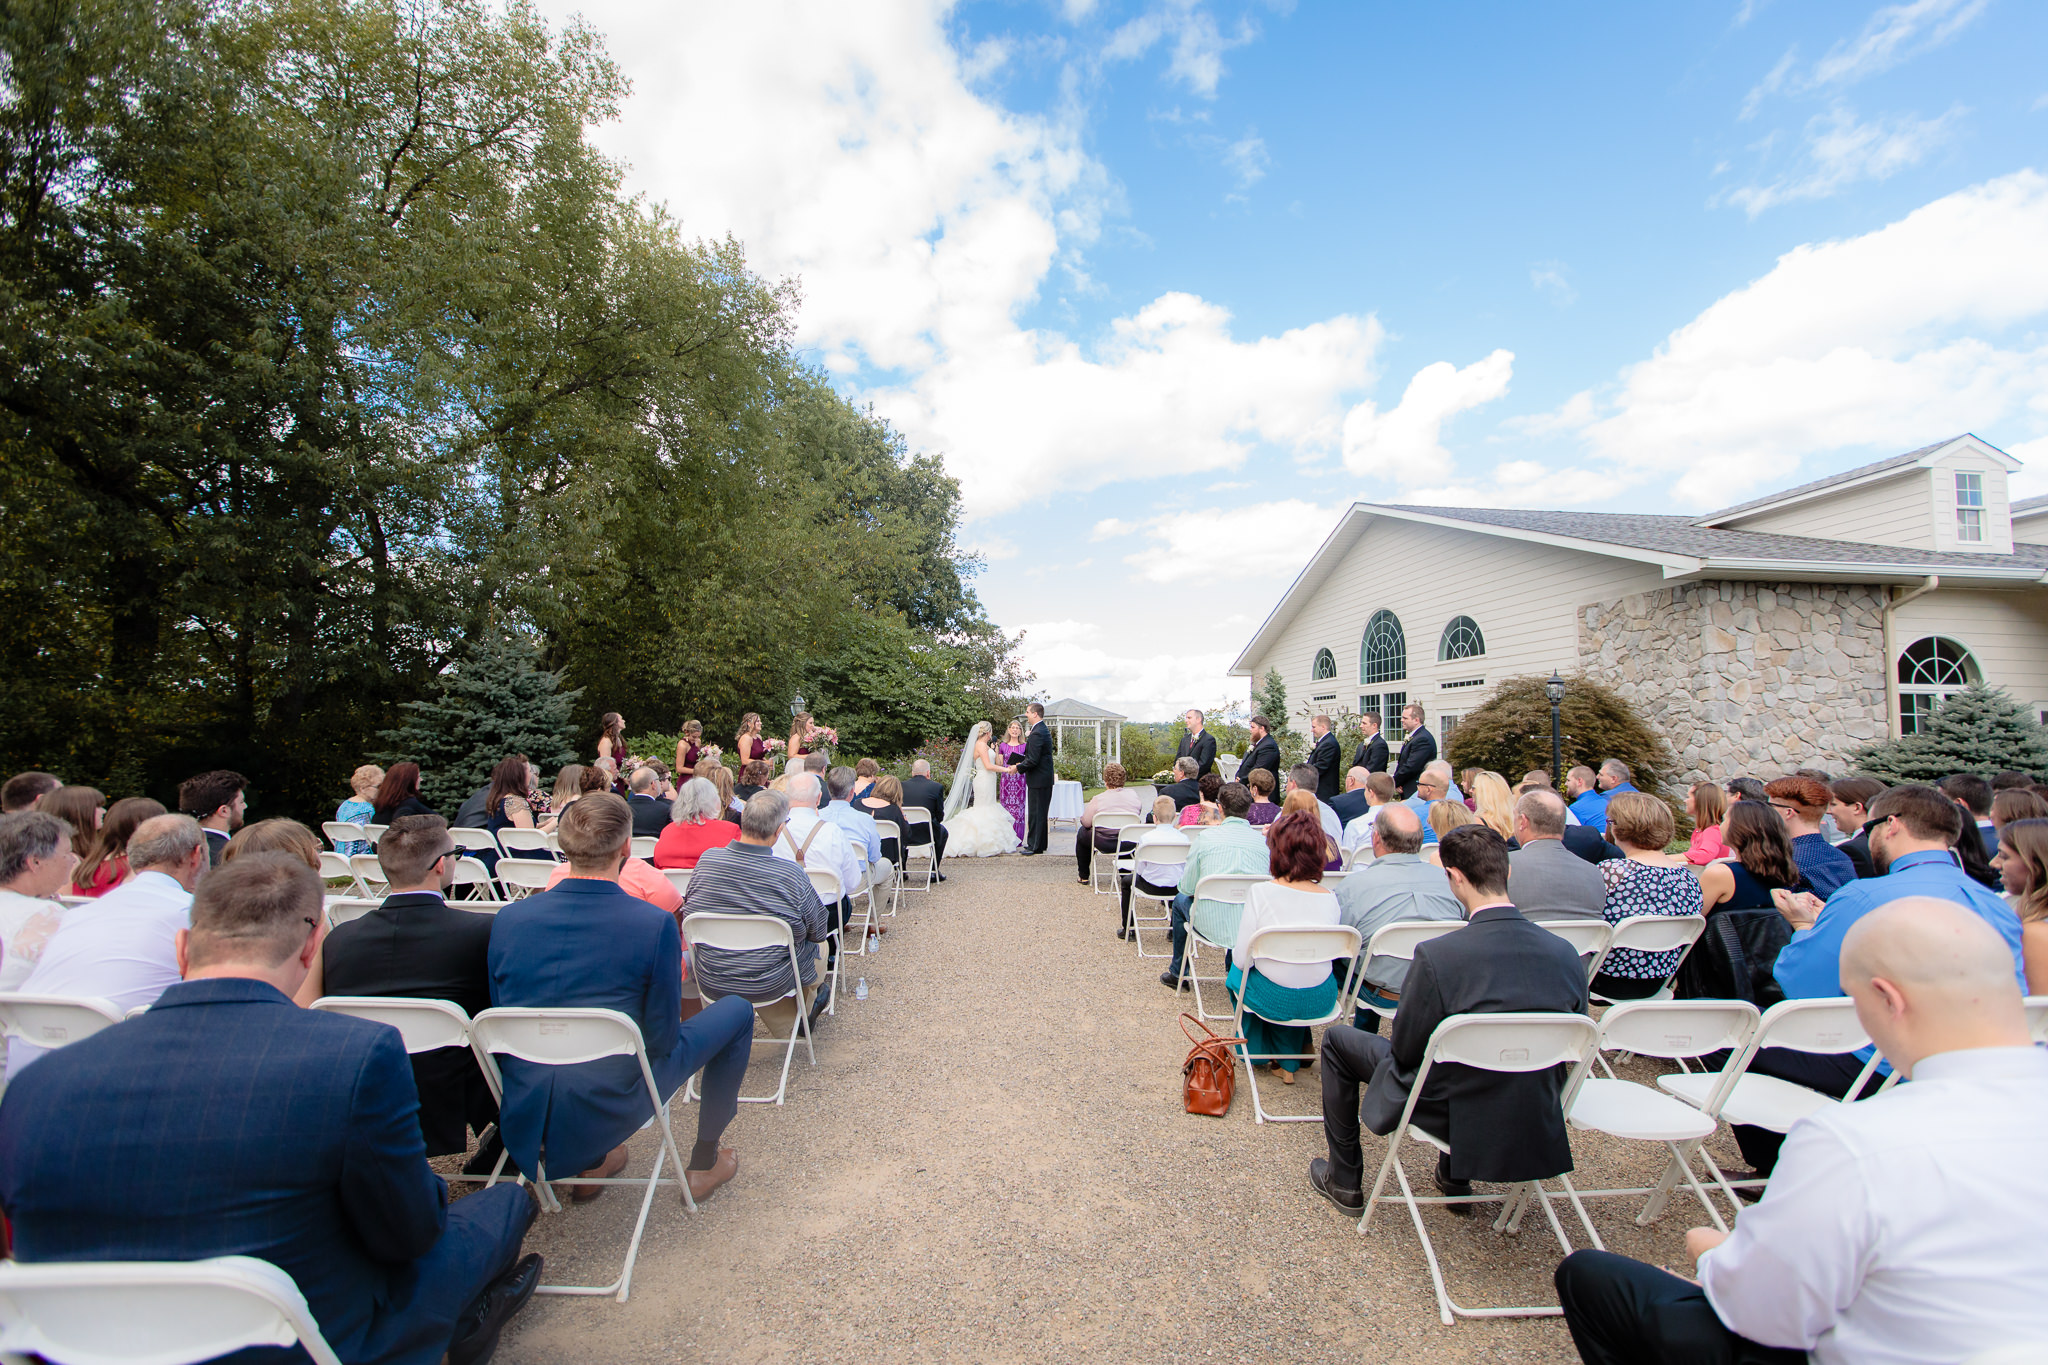 Outdoor wedding ceremony in September at Greystone Fields in Gibsonia